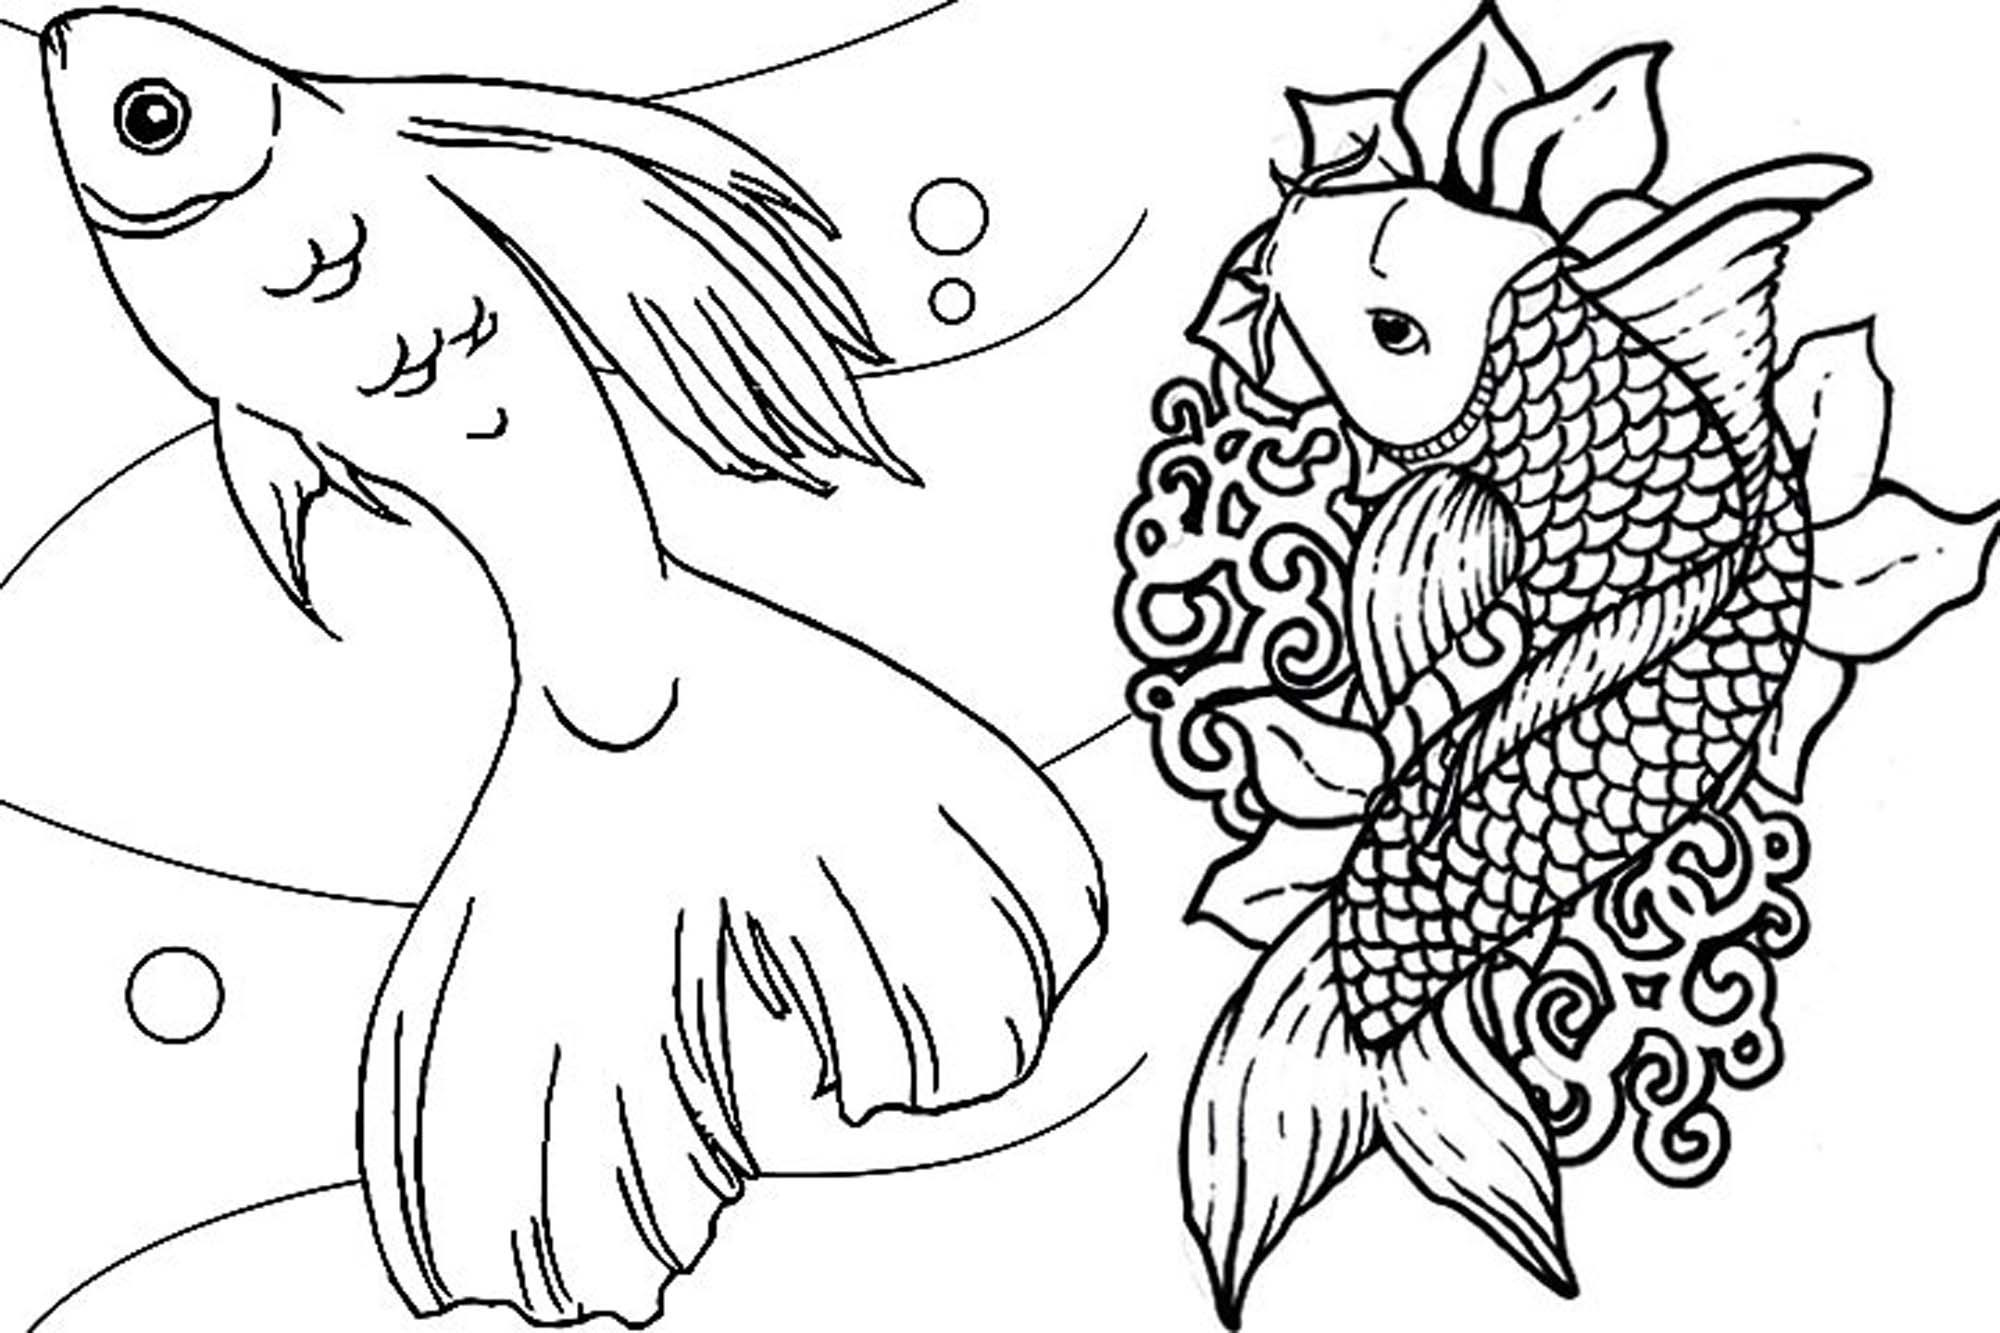 detailed-fish-coloring-pages-at-getcolorings-free-printable-colorings-pages-to-print-and-color